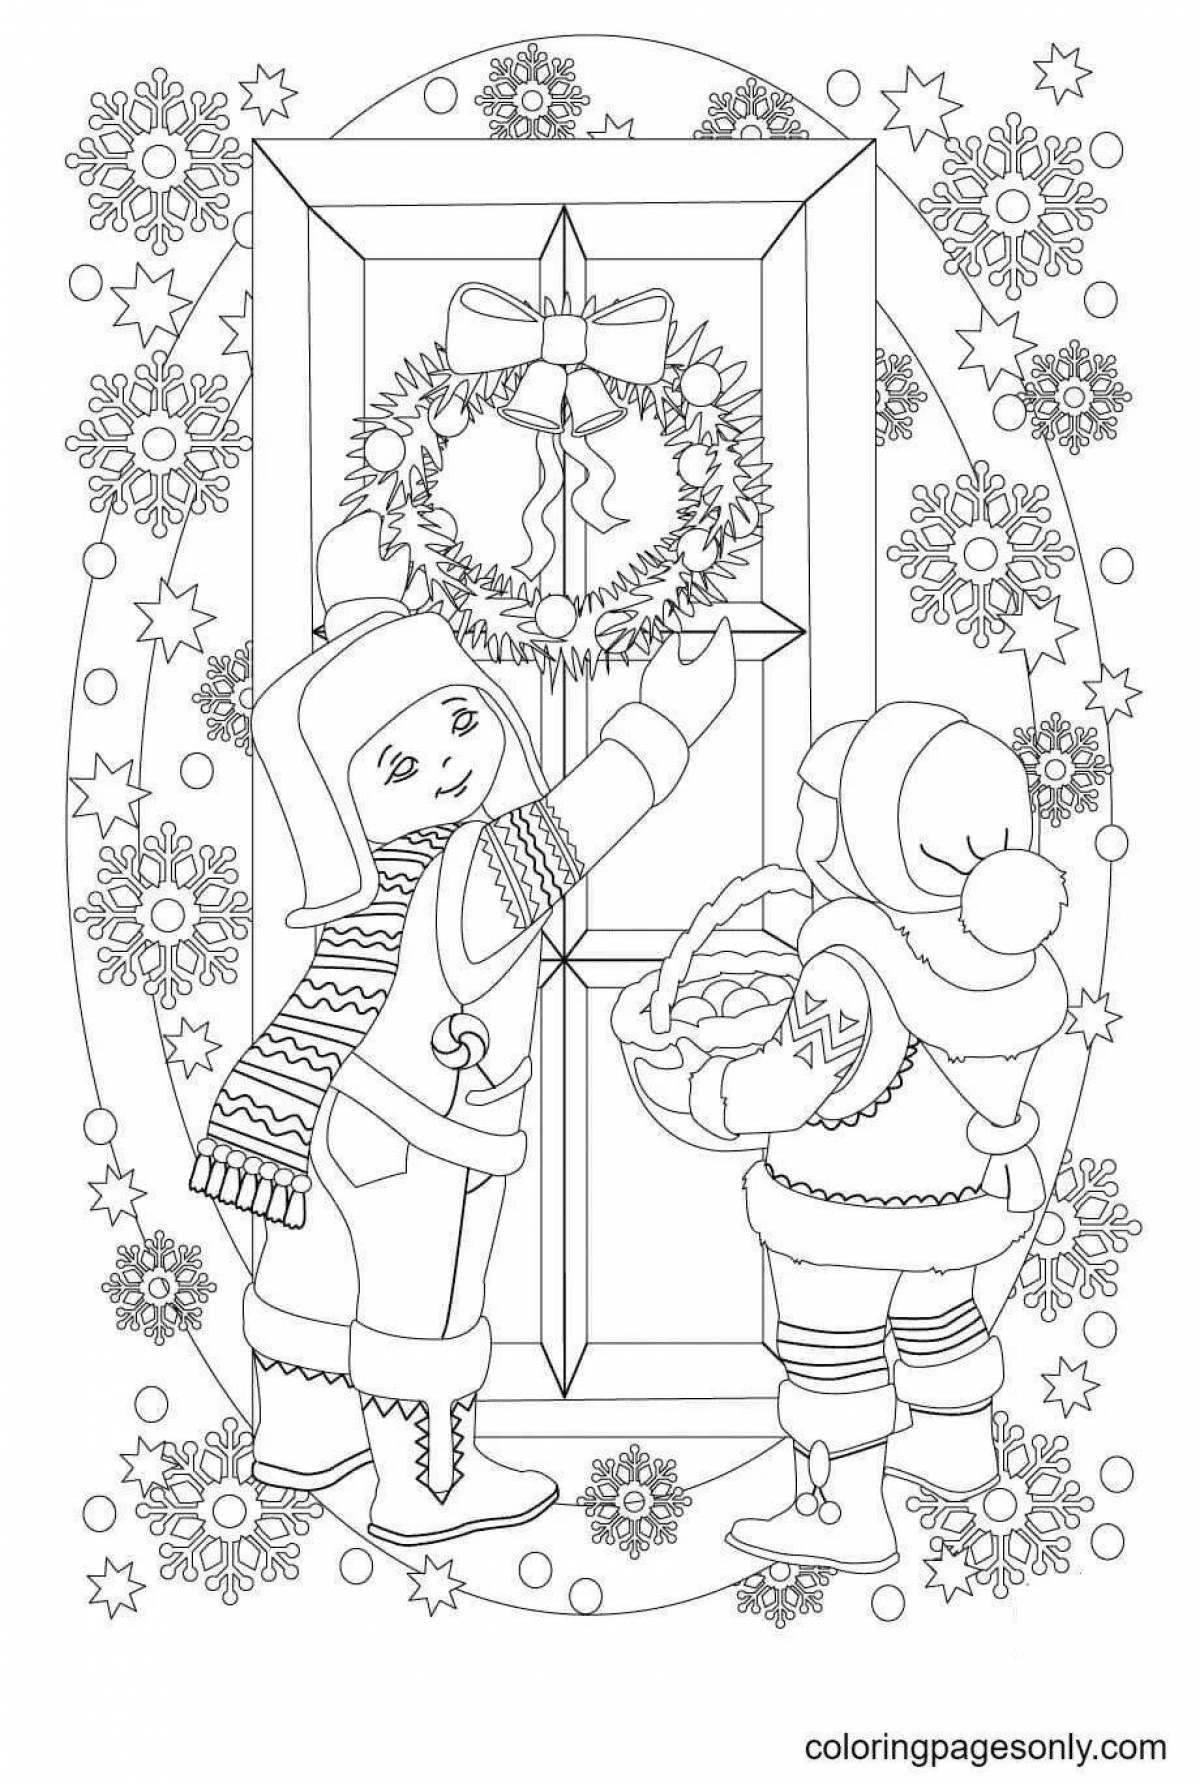 Tempting coloring book orthodox holidays winter book